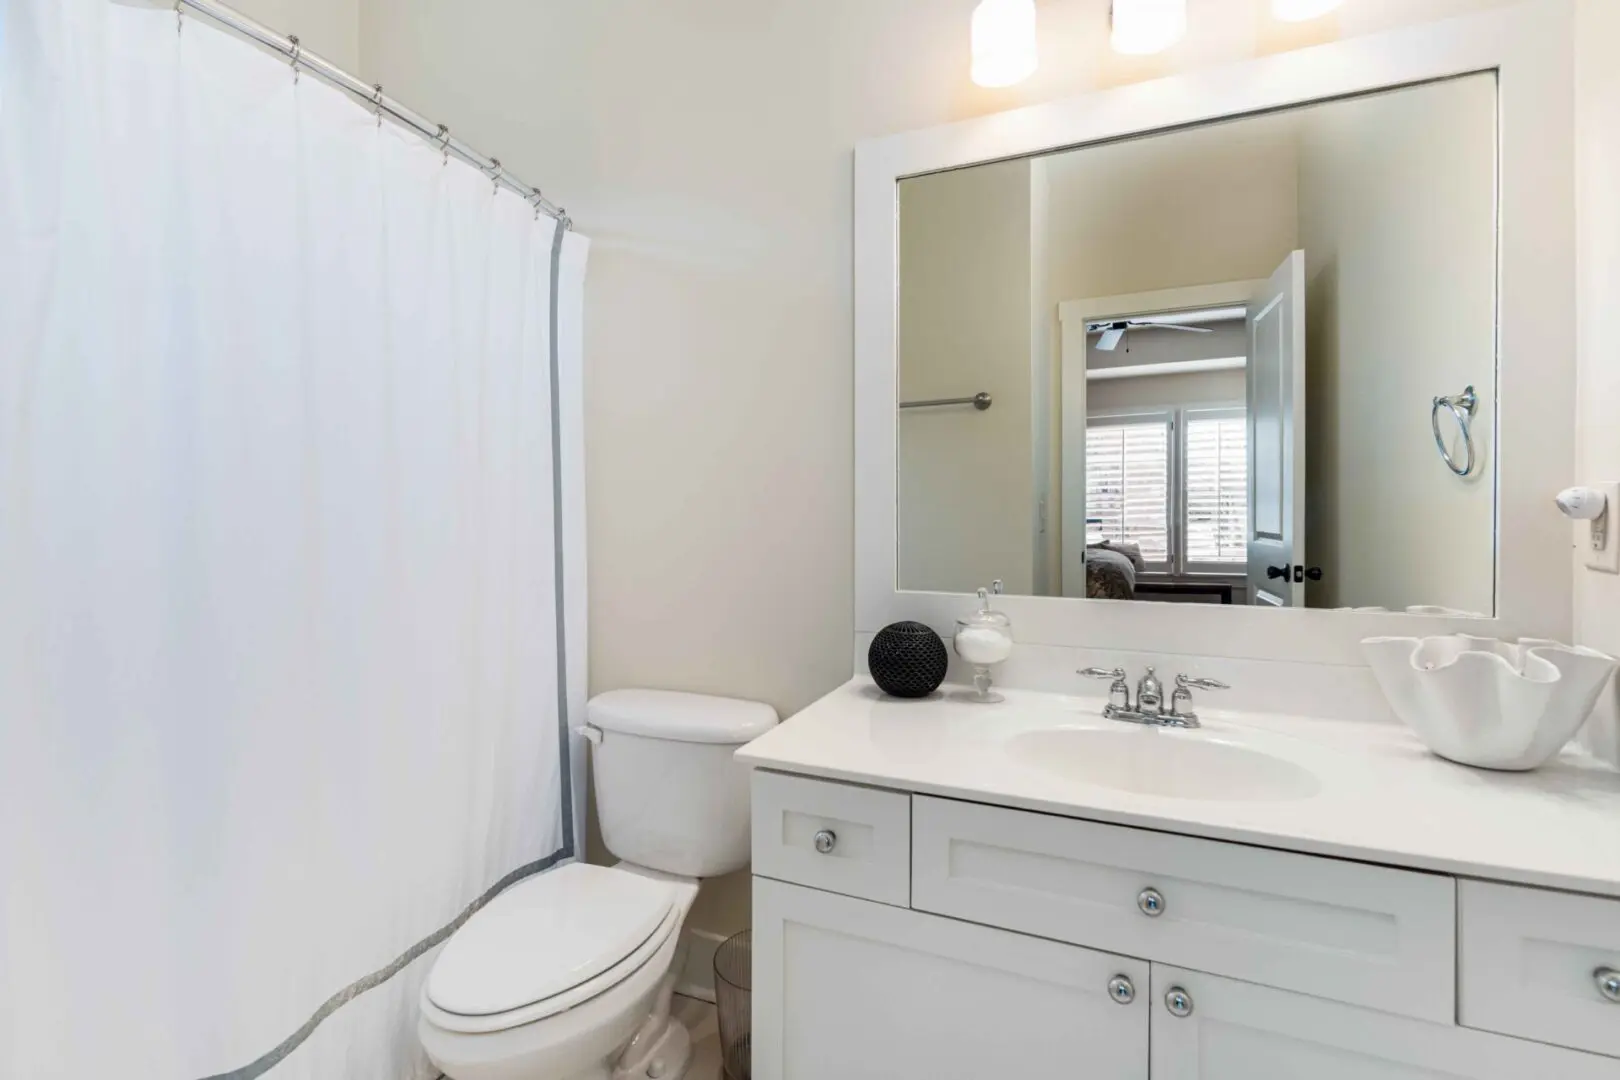 A bathroom with white walls and a toilet, sink, mirror, and shower.